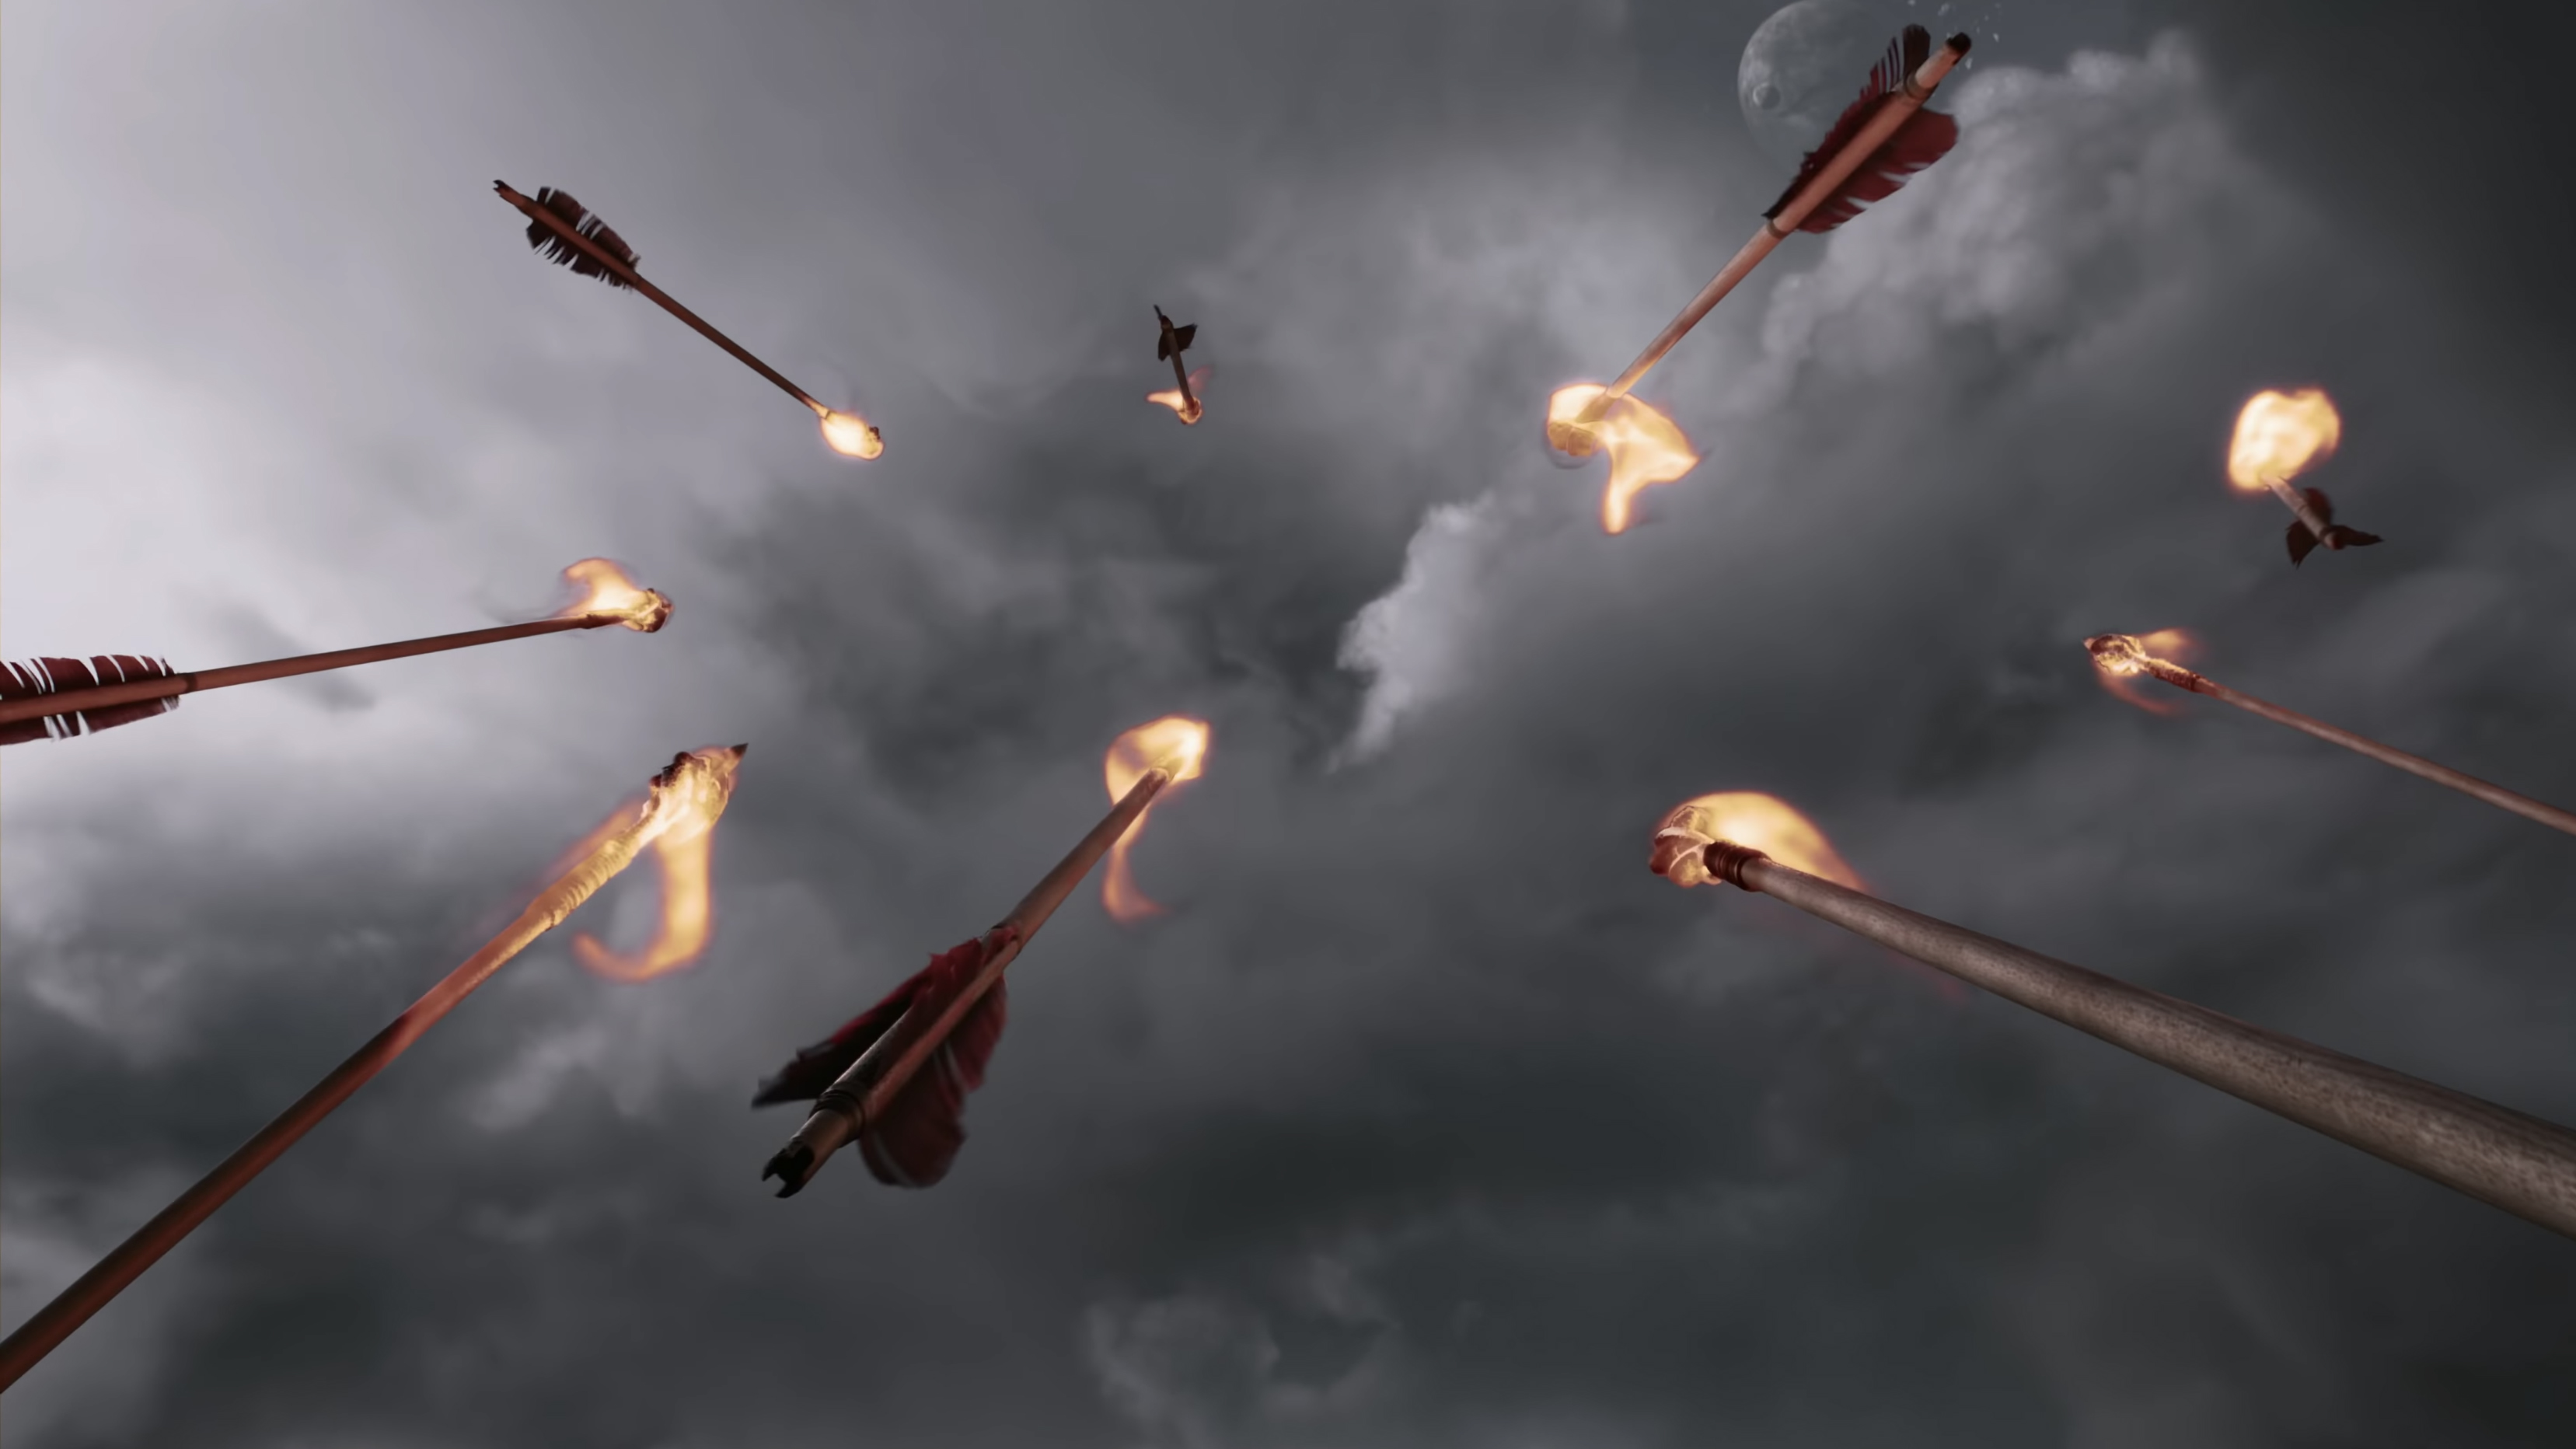 Flaming arrows against a cloudy sky